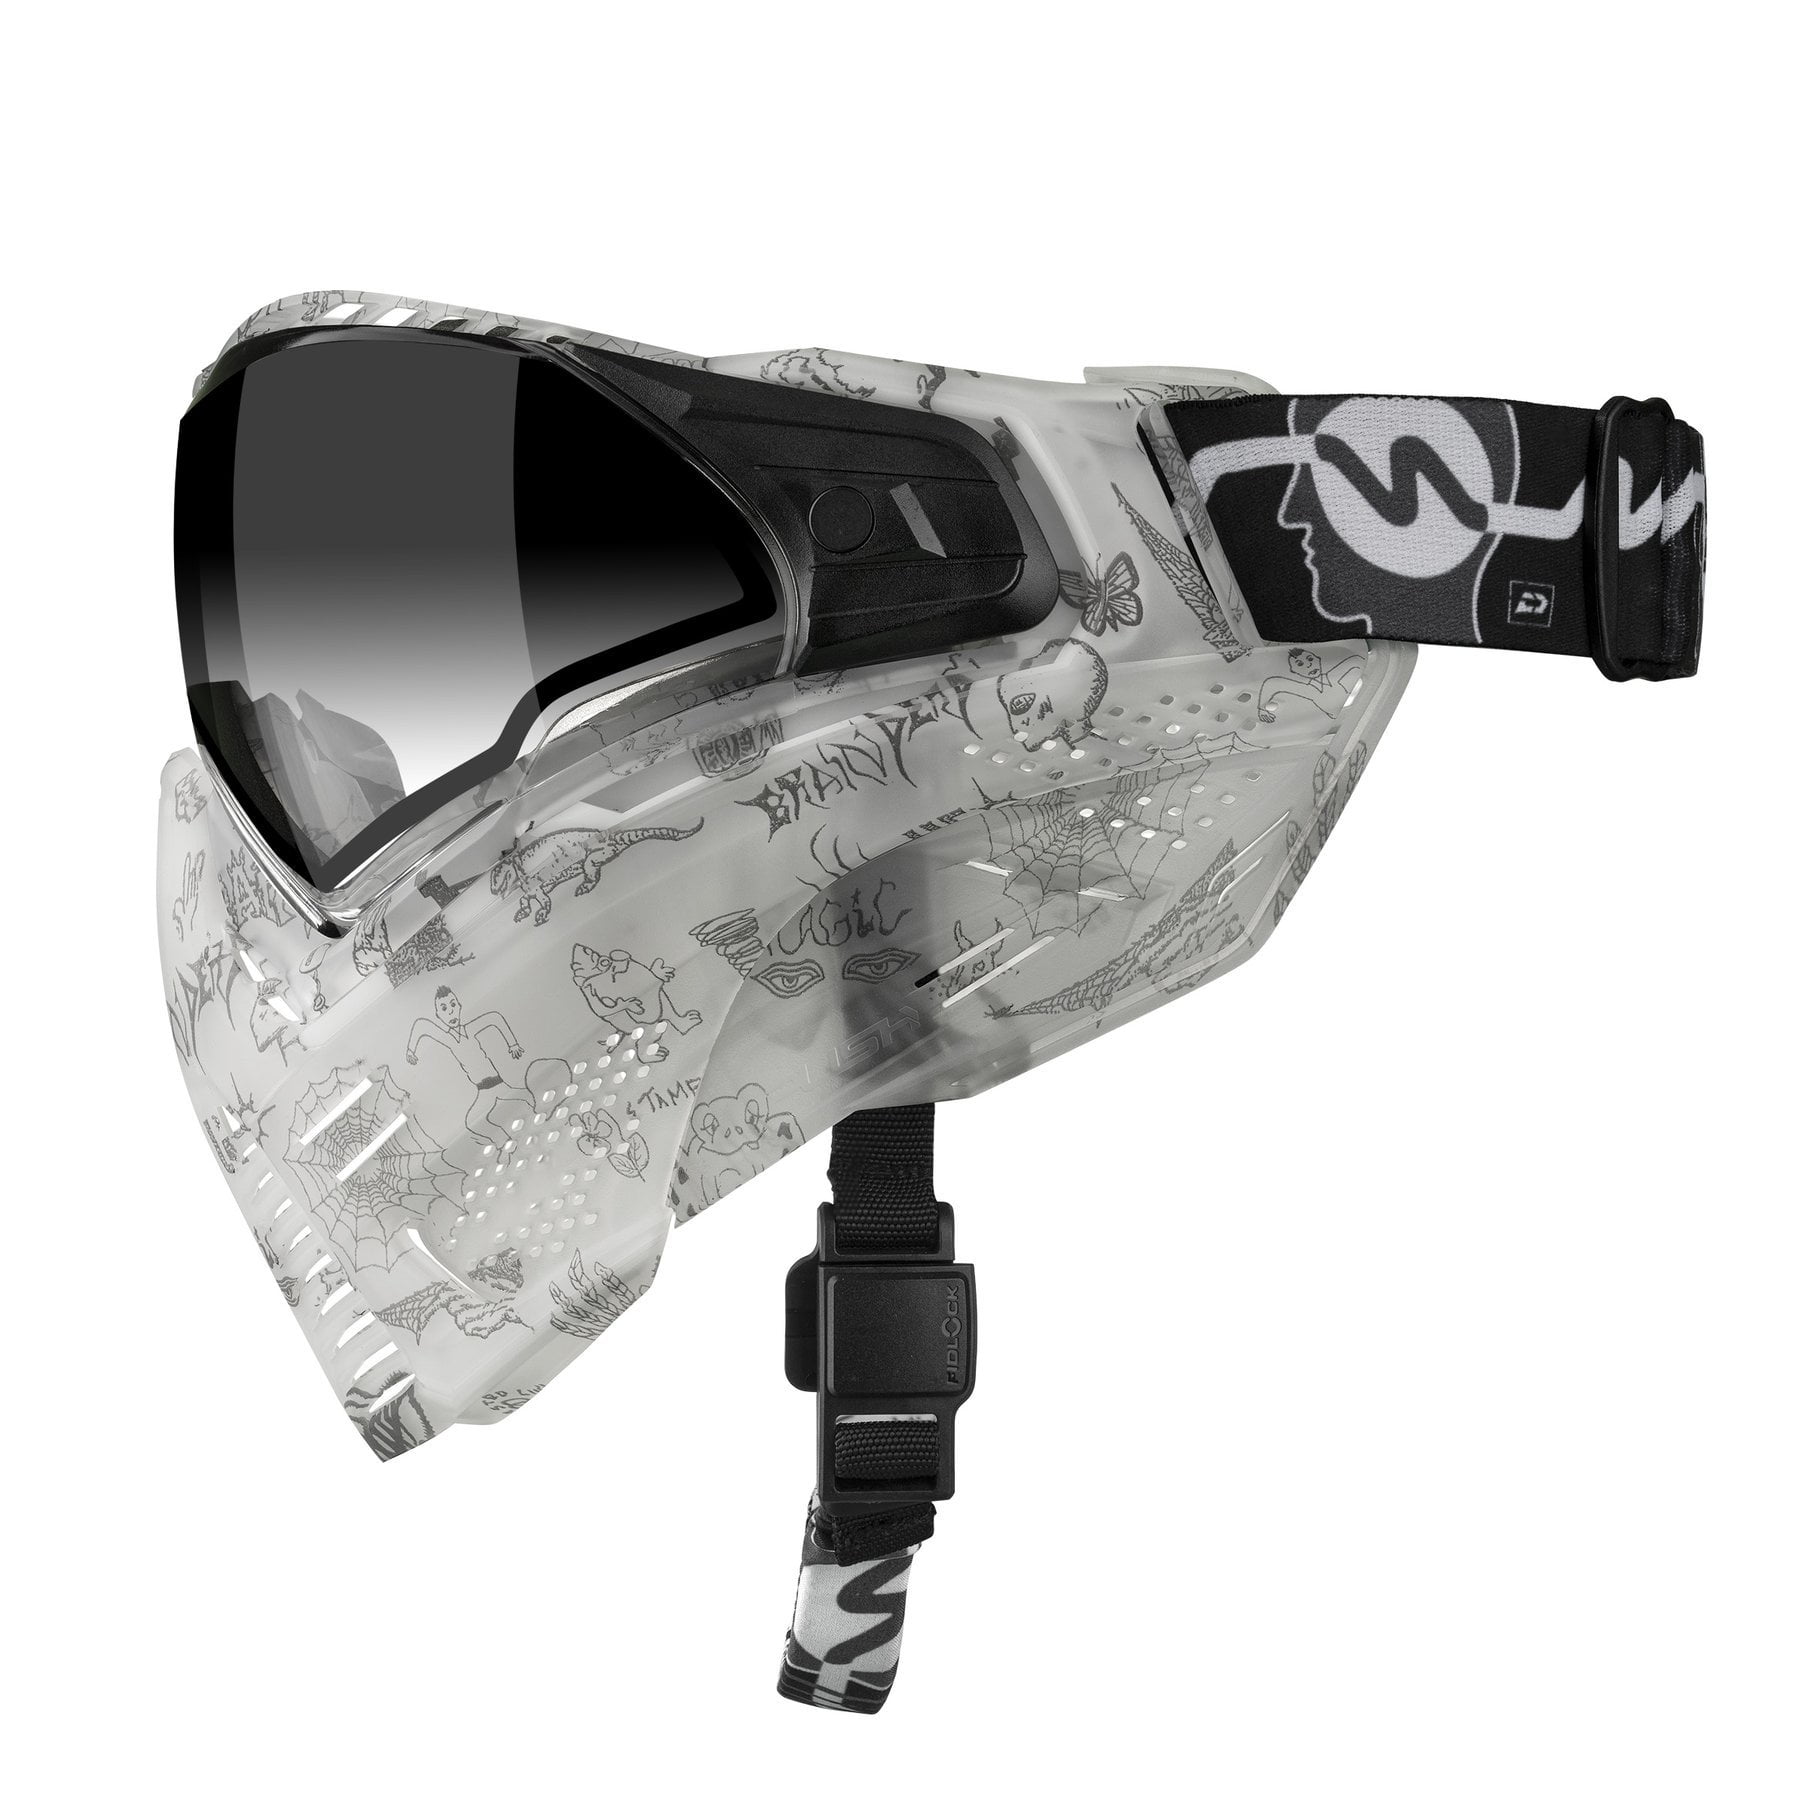 PUSH UNITE Paintball Goggles Mask with QUAD Pane Lens and Case Tan Camo 